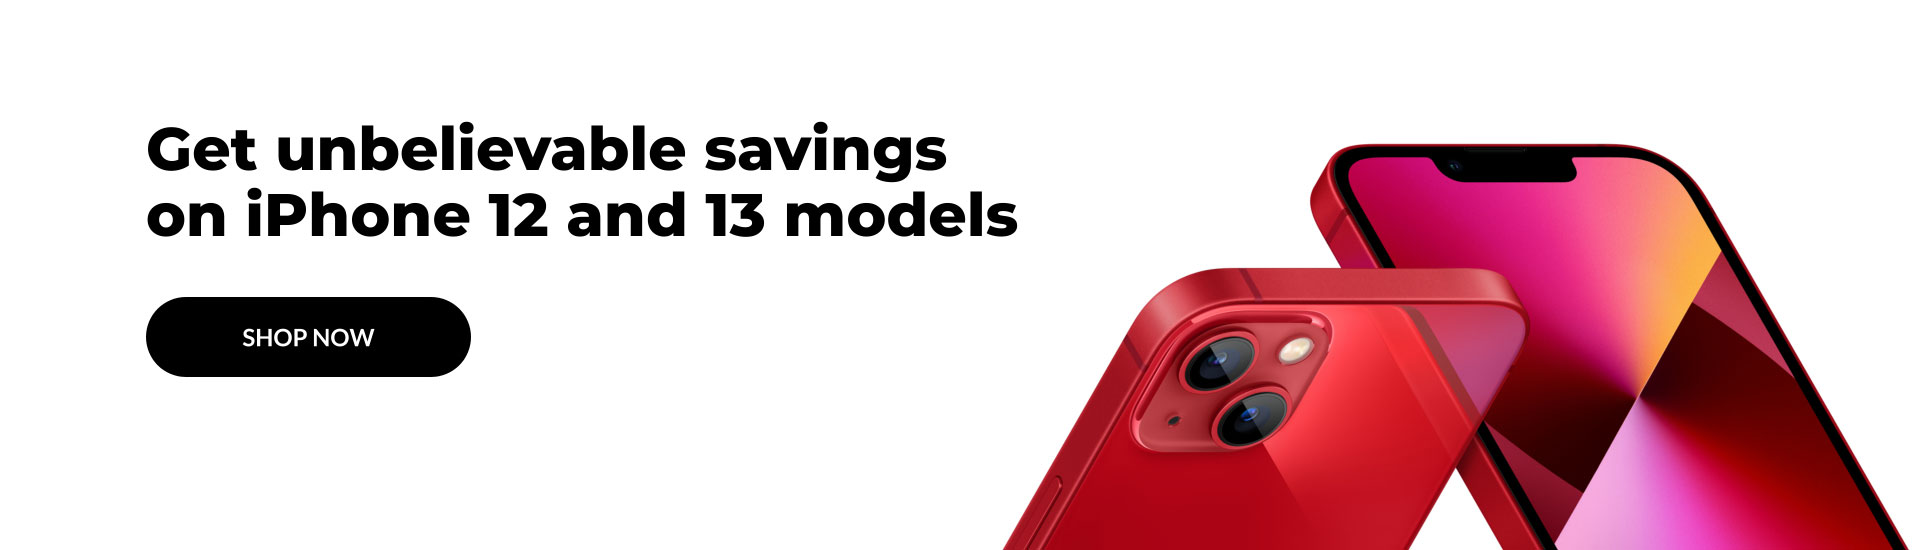 Get unbelievable savings on iPhone 12 and 13 models